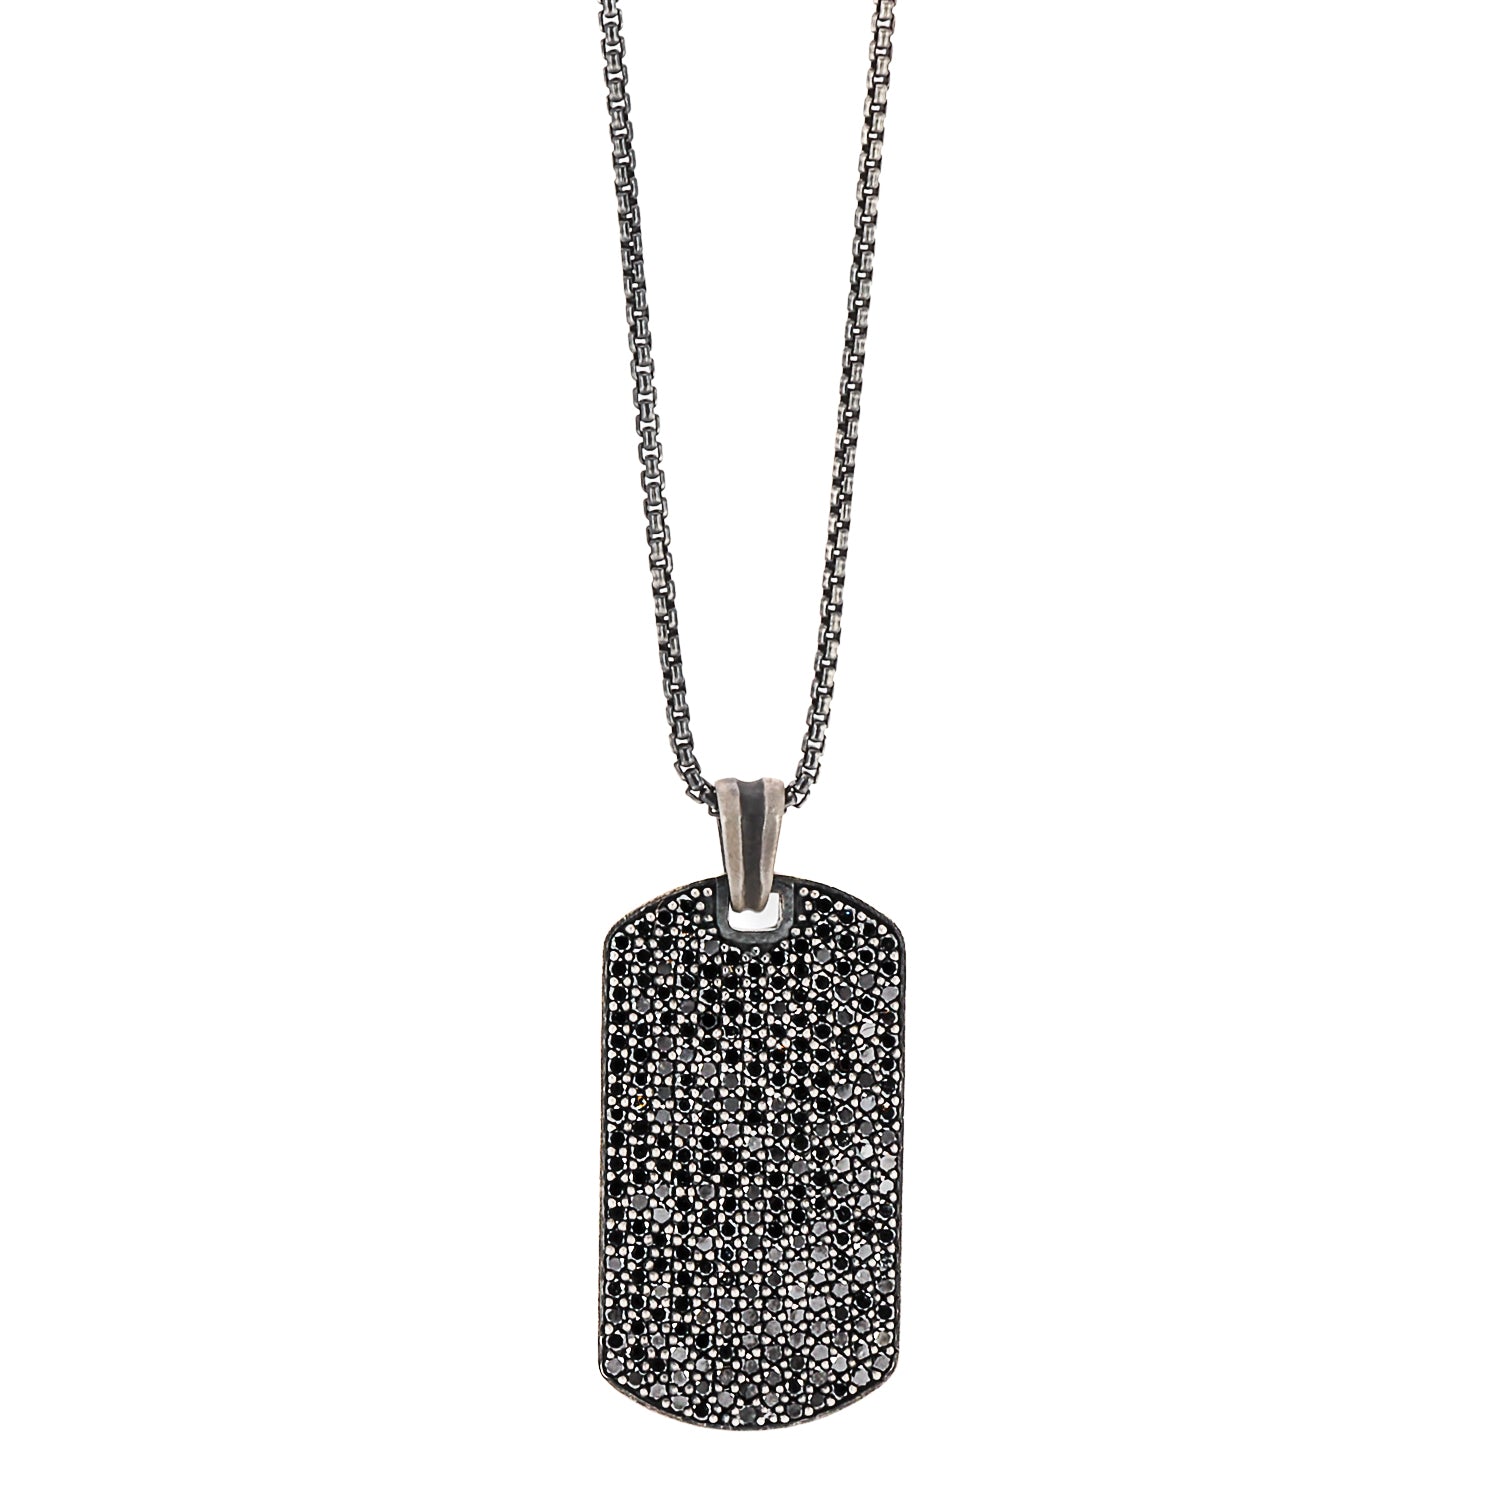 Close-up of the Dog Tag Black Diamond Necklace, showcasing the intricate sterling silver dog tag pendant adorned with a dramatic black pave of diamonds.